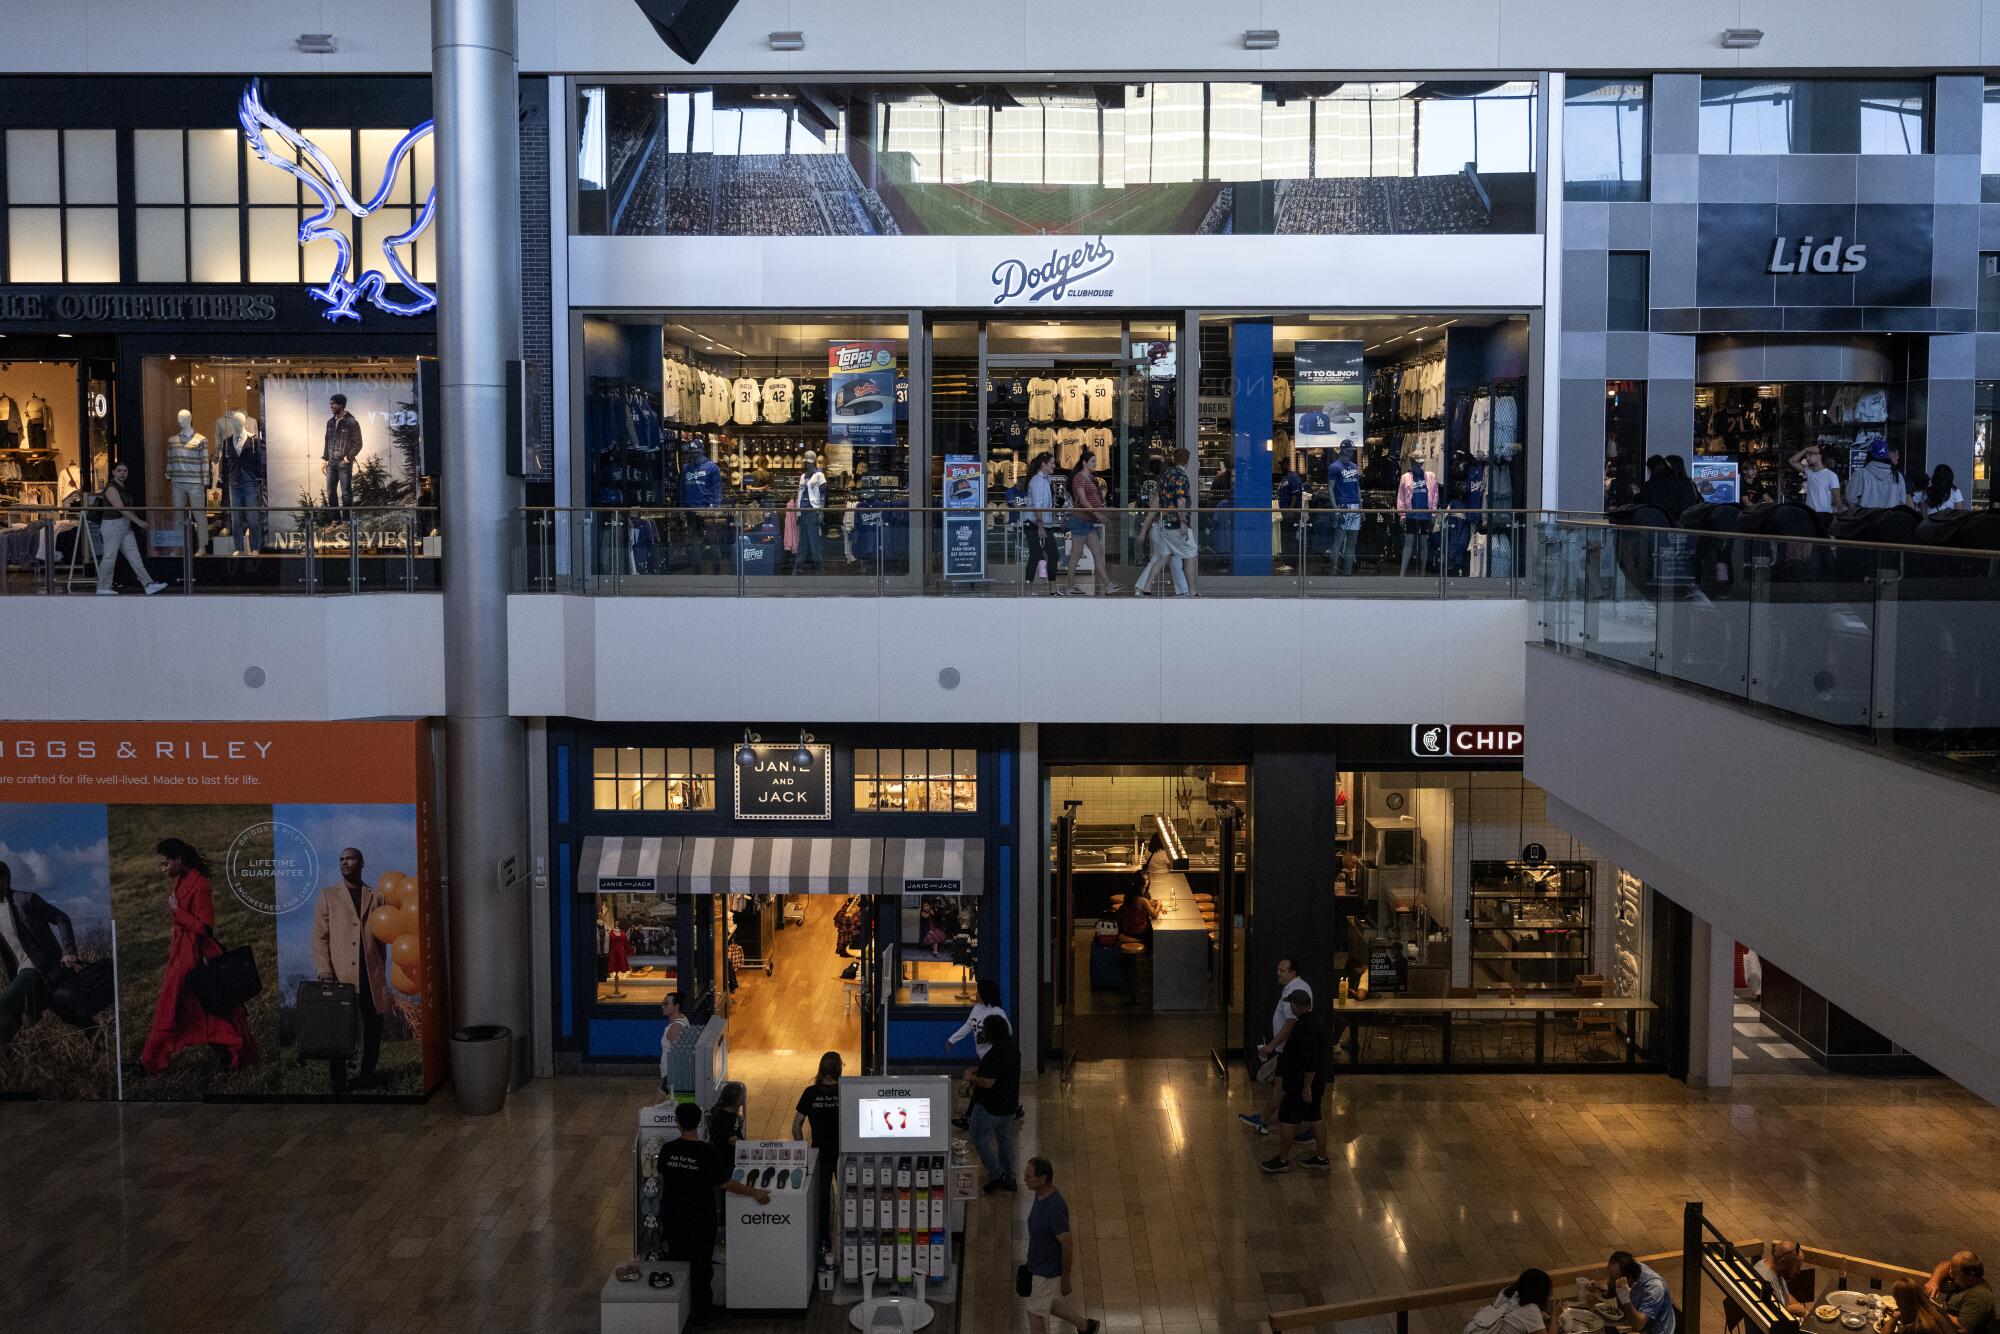 The Dodgers Clubhouse store in a mall.